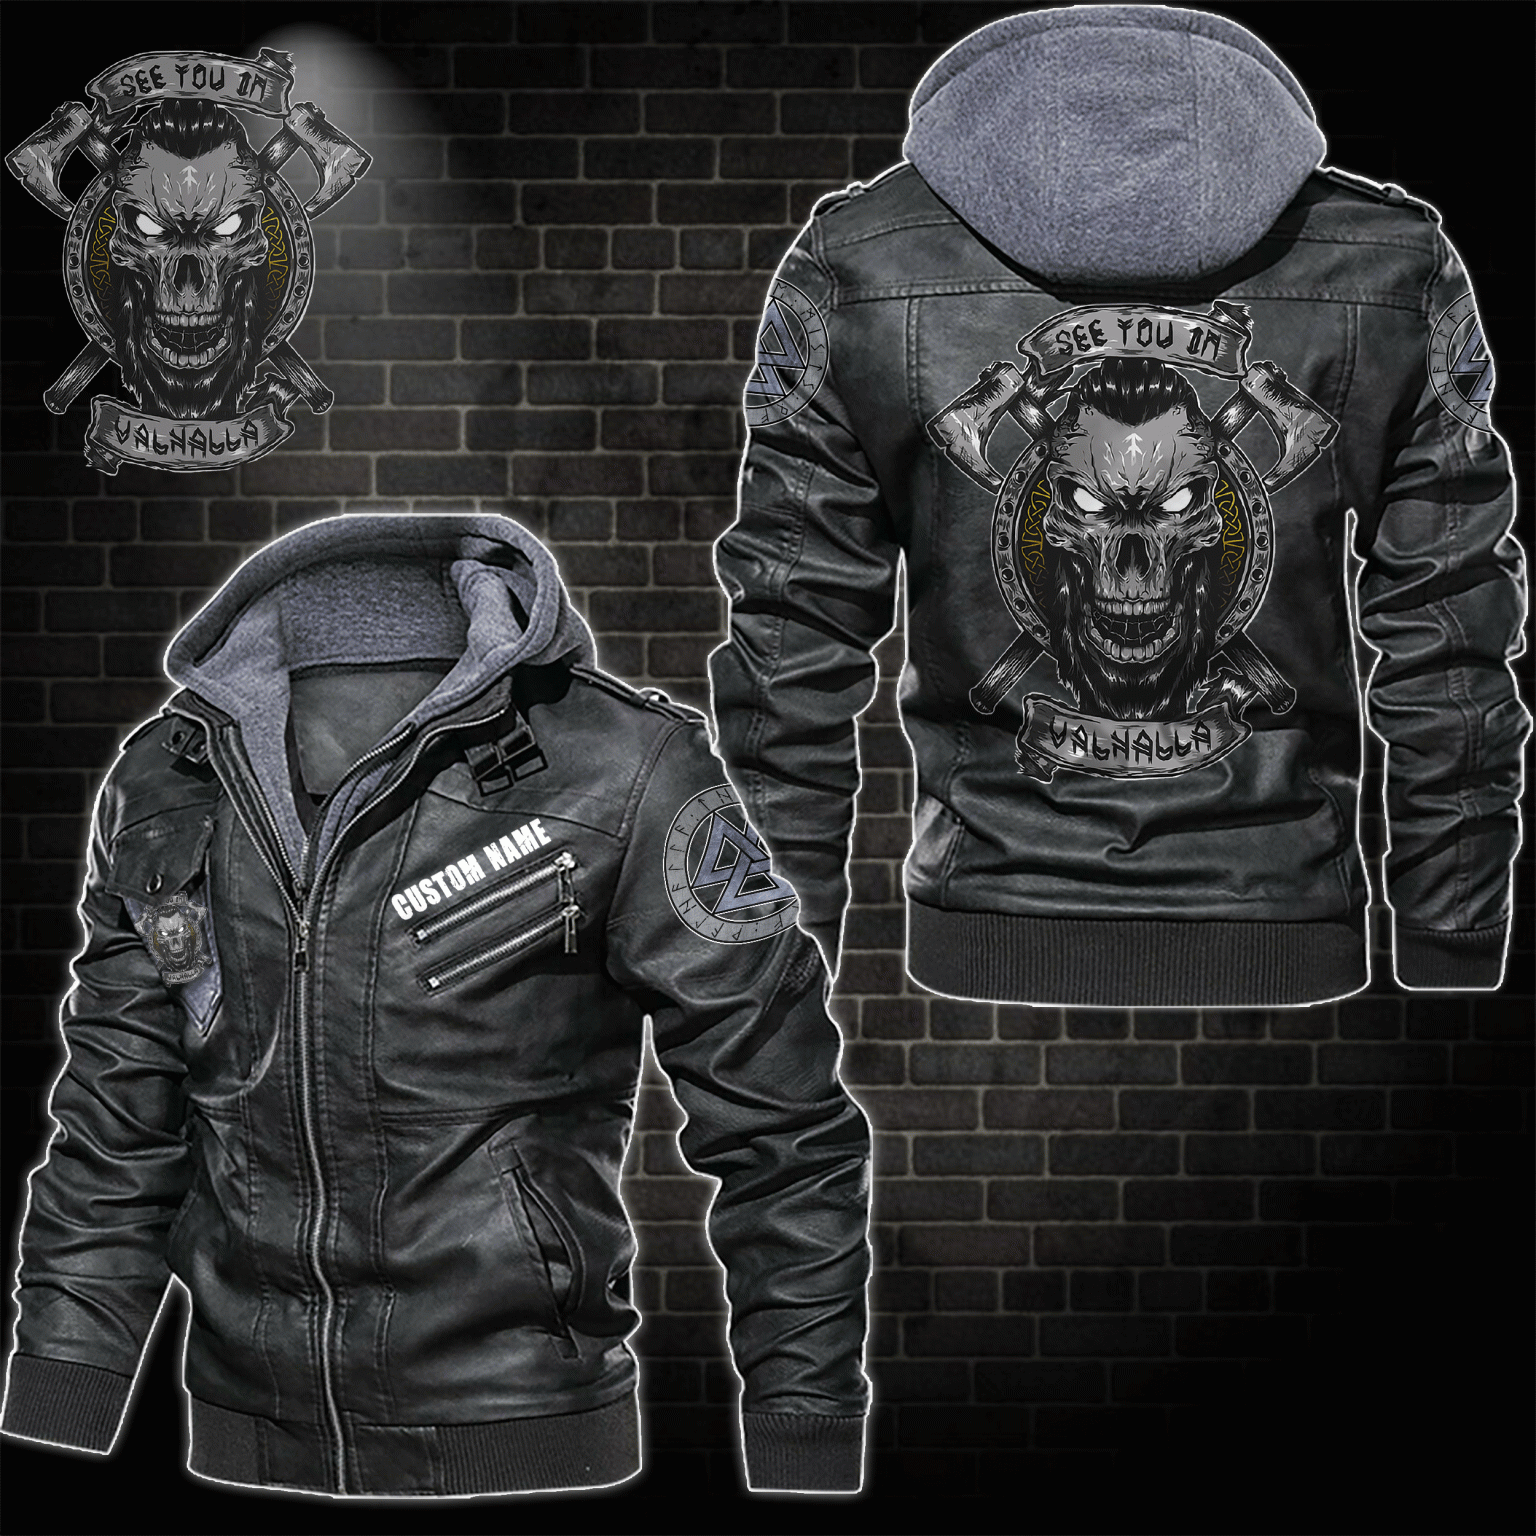 Personalized See You In Valhalla Leather Jacket - LinosTee.com